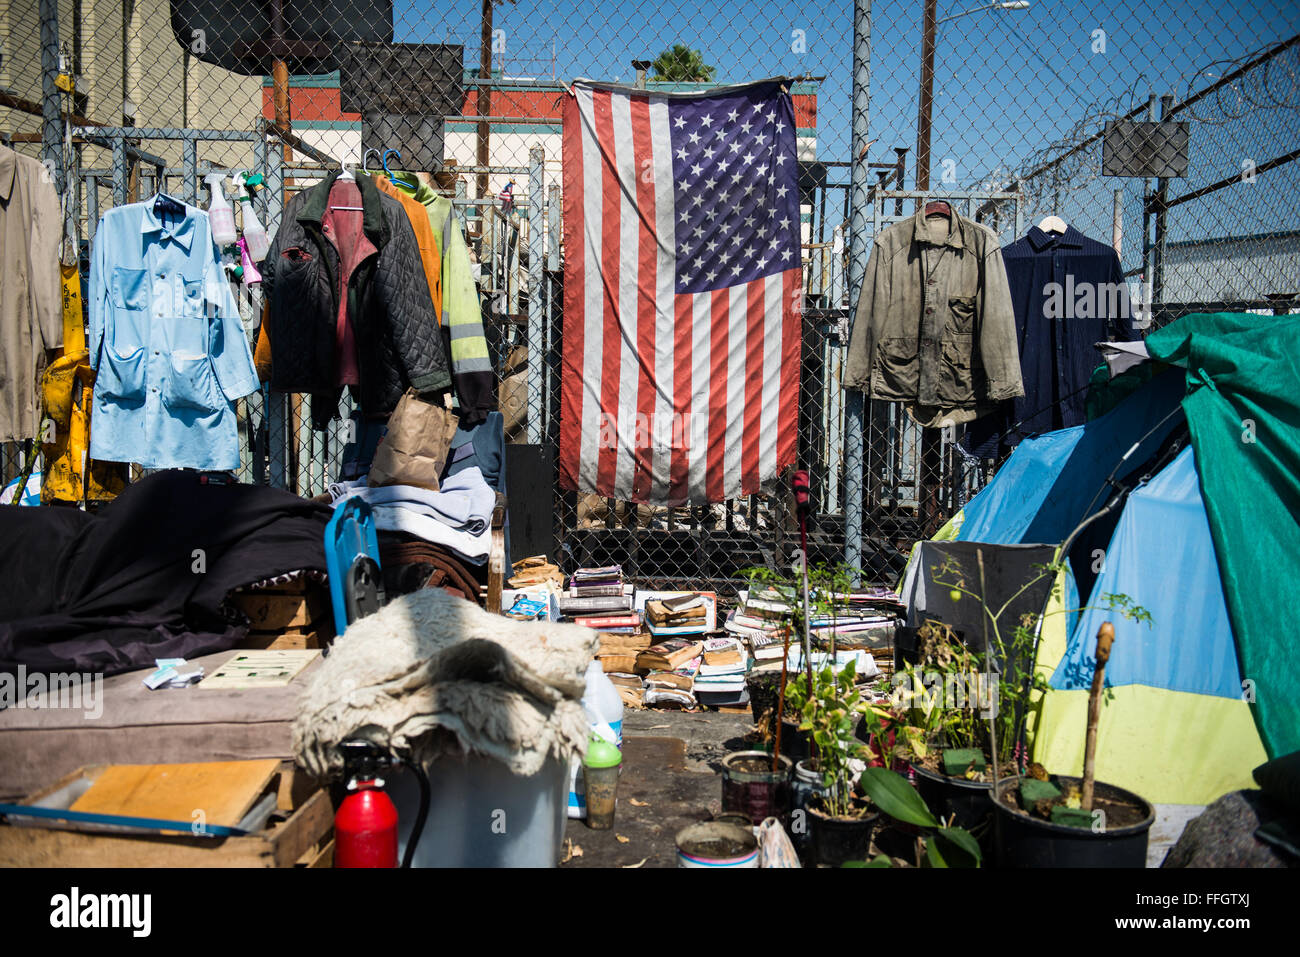 Skid Row is an area of downtown Los Angeles and a main area that the Vet Hunters search for homeless veterans and people who need help. Skid Row is a 54-block area with thousands of homeless individuals. It is one of the largest homeless sections in the country. Stock Photo